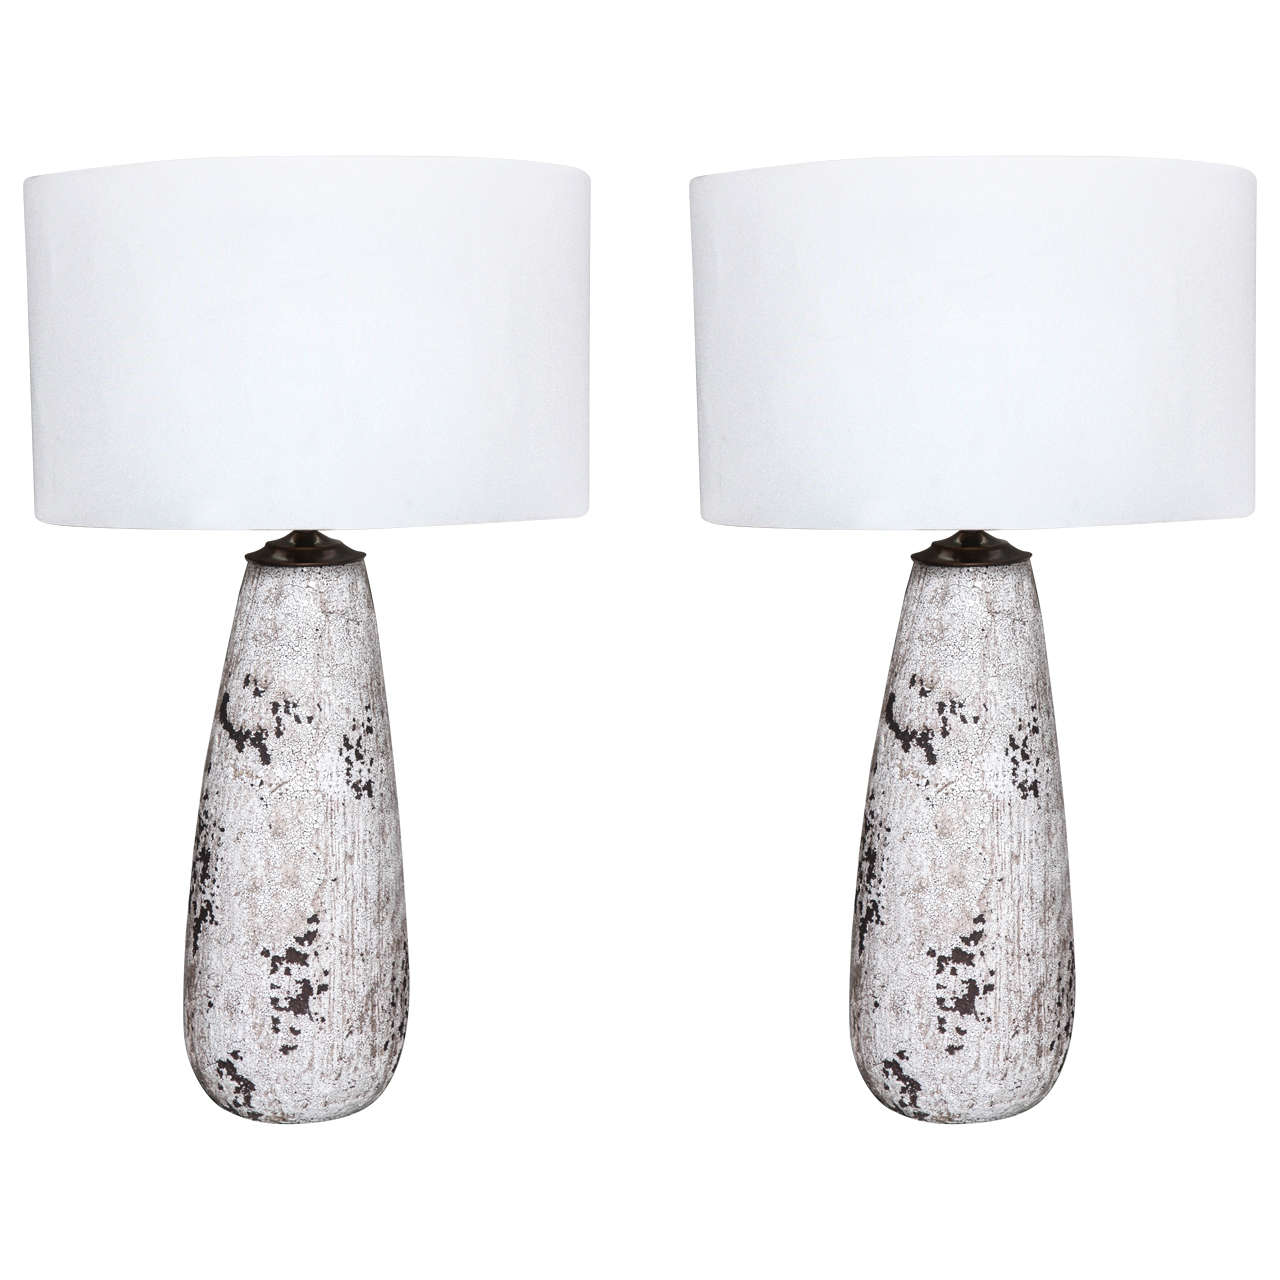 Pair of Textured Ceramic Table Lamps